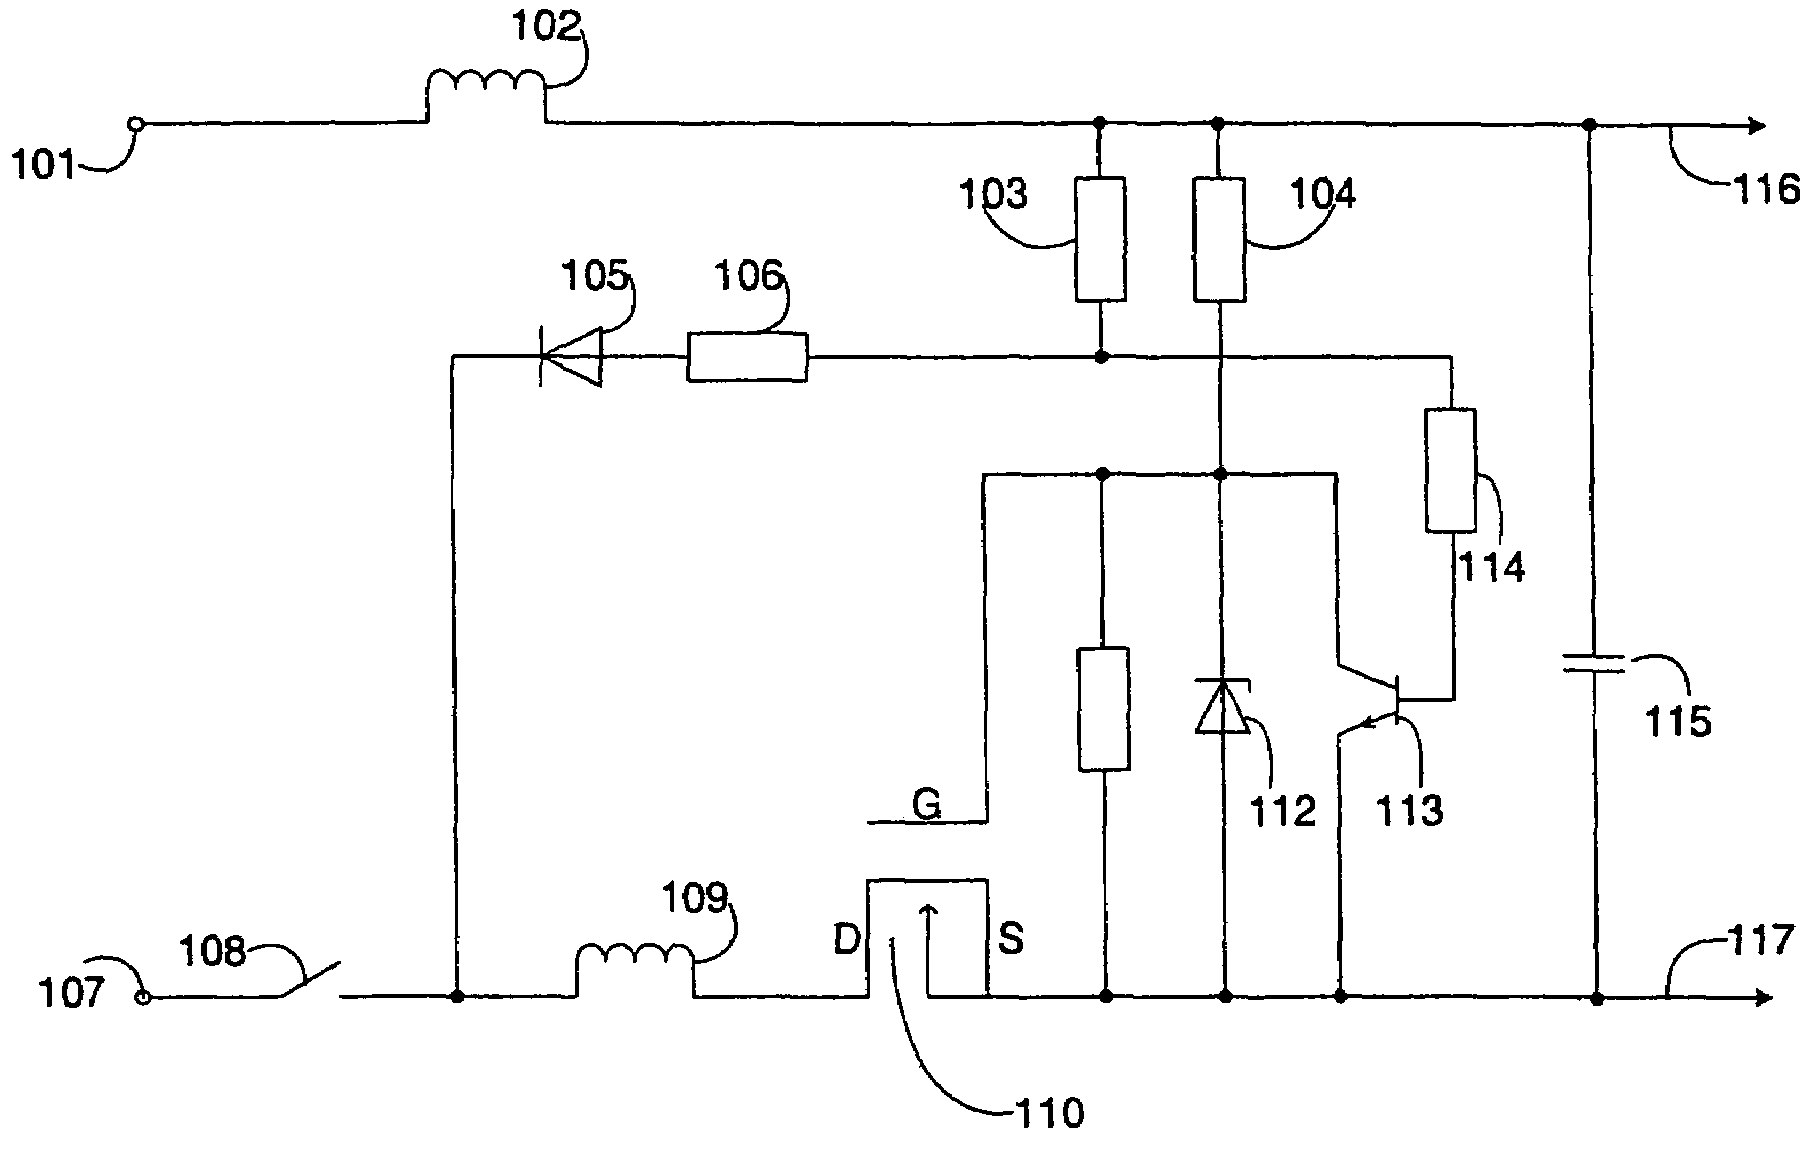 Polarity protection implemented with a MOSFET